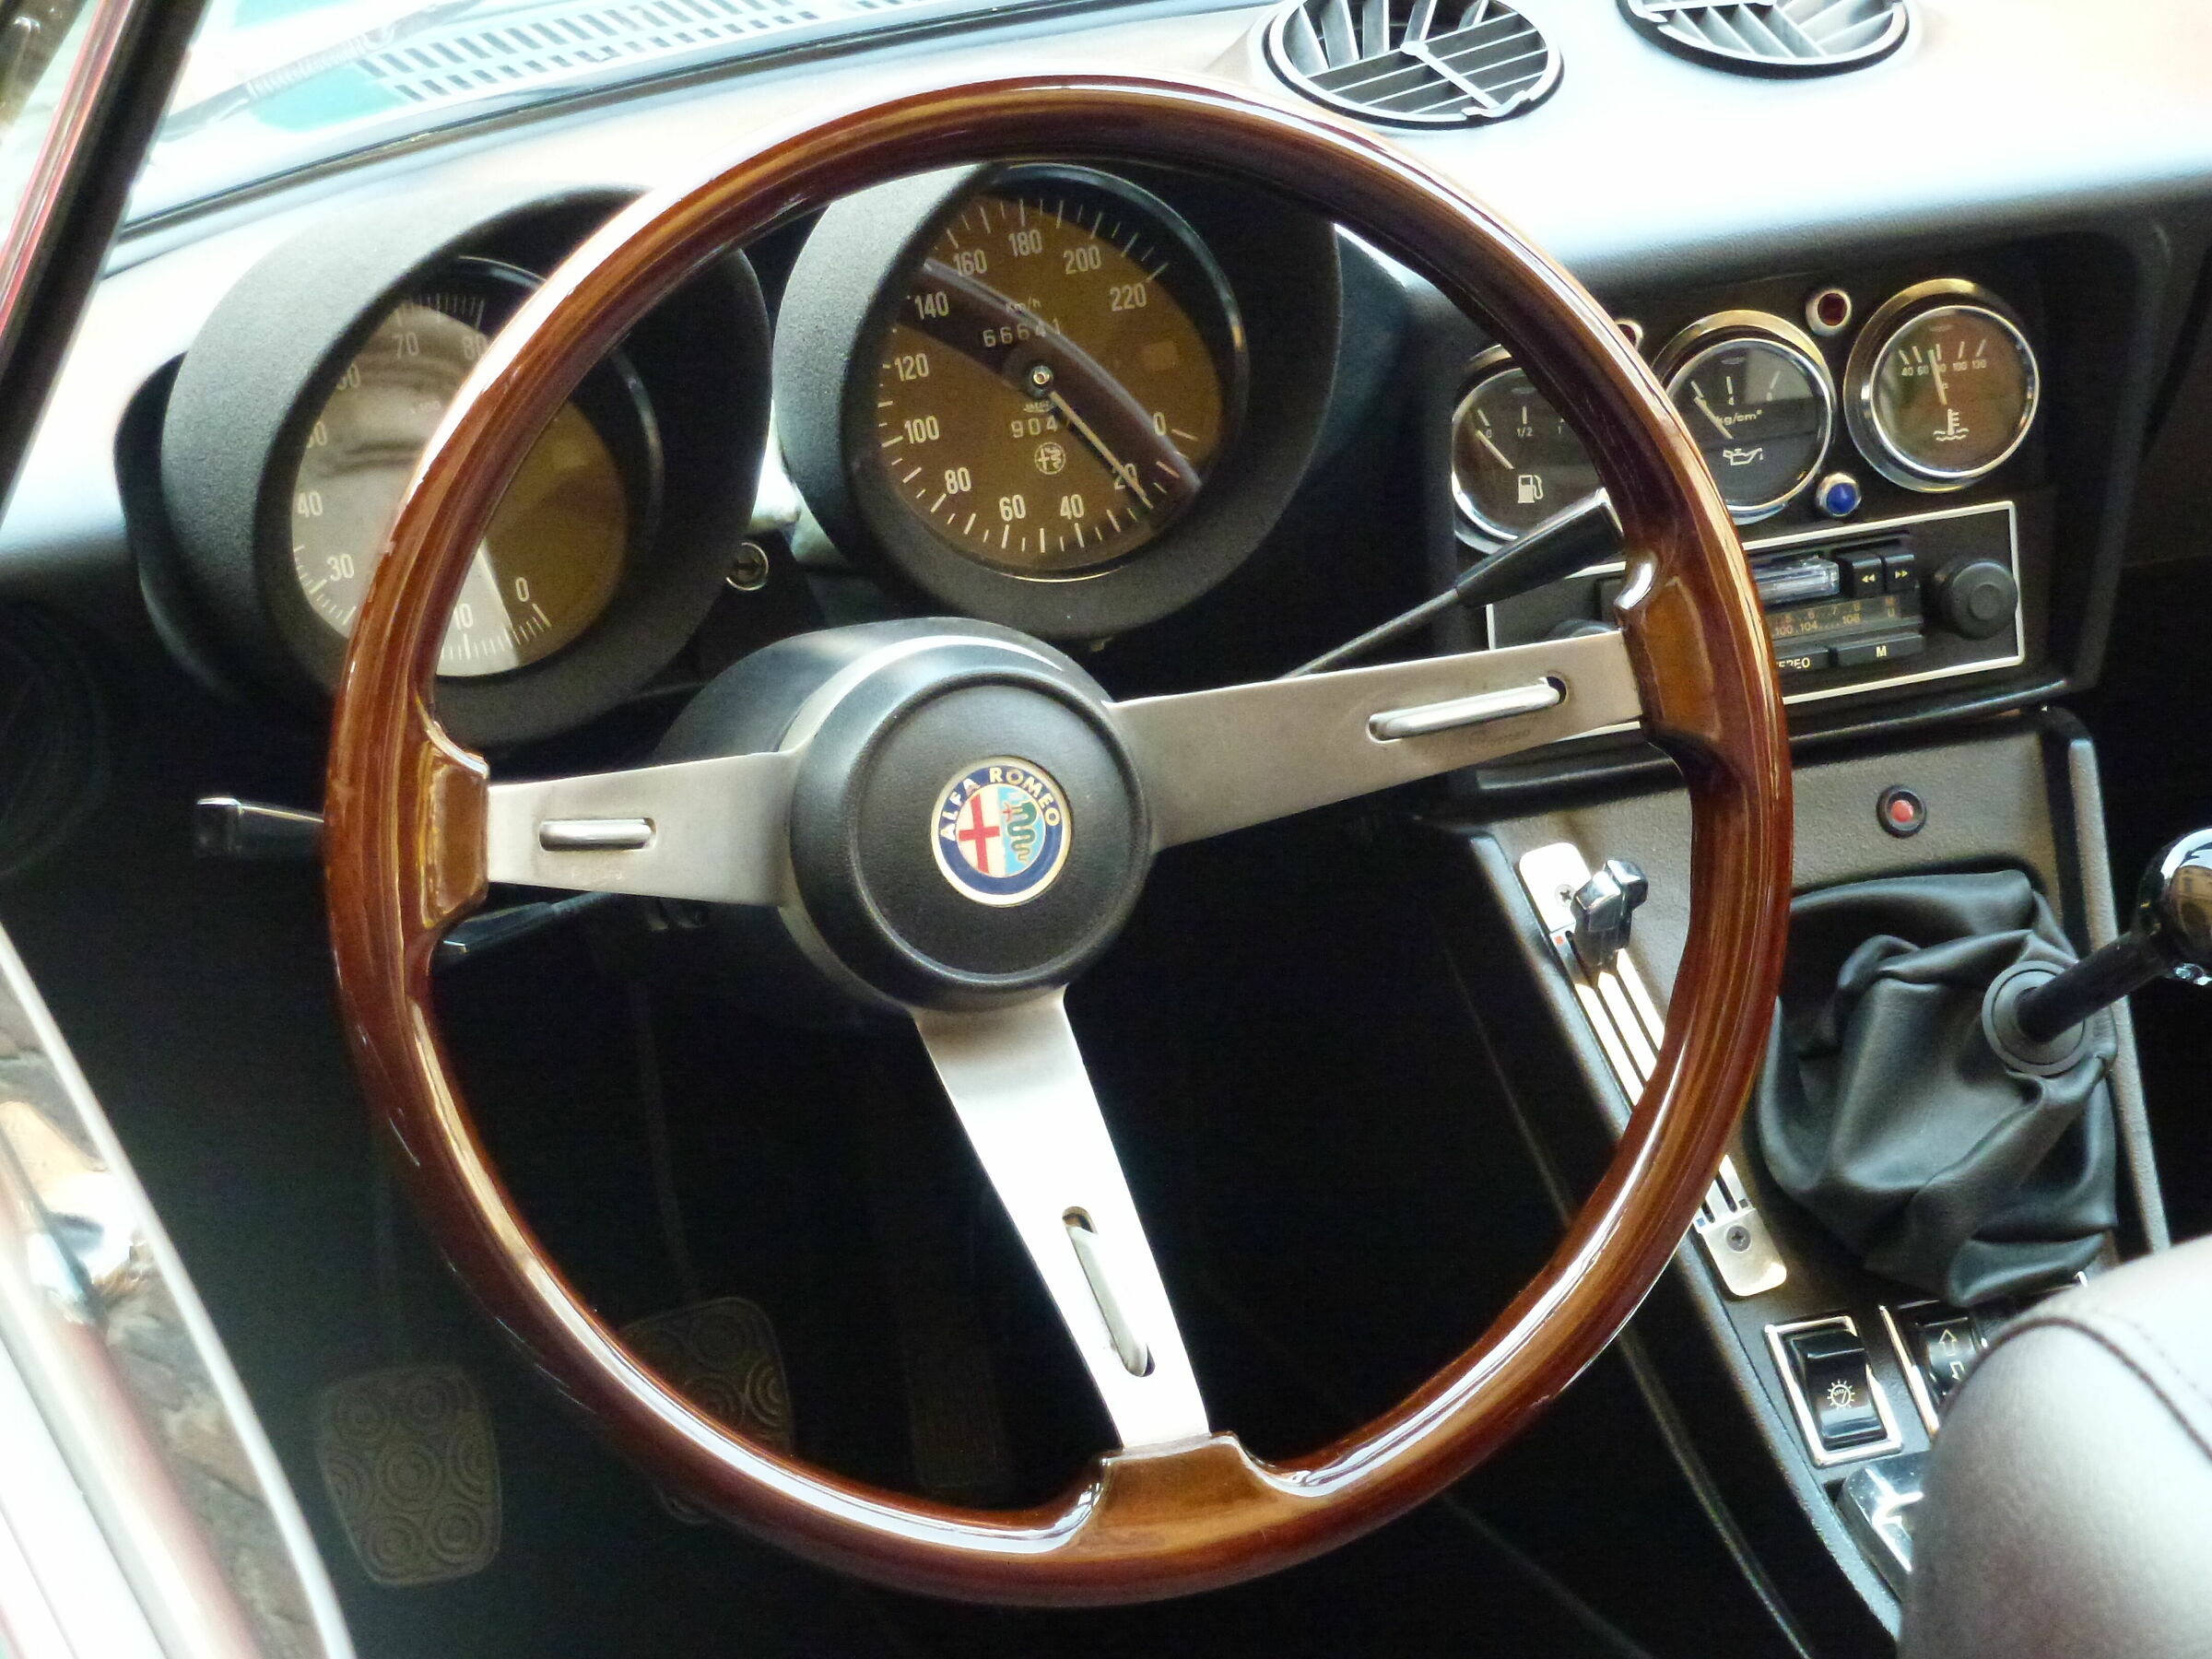 Still life IV - the dashboard of the Alfa Duet...